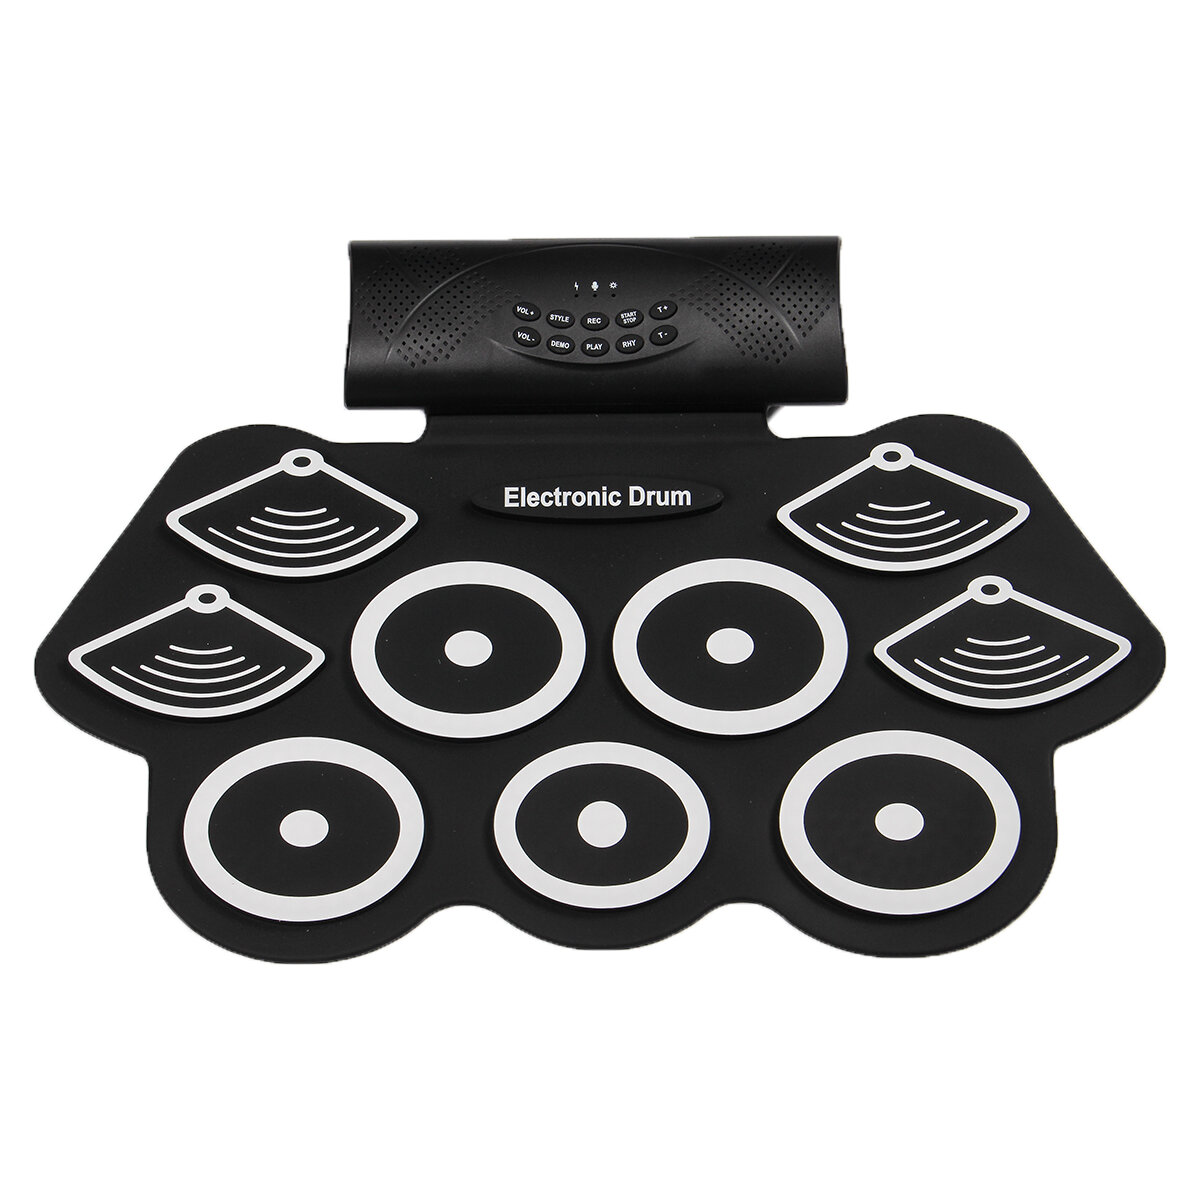 KONIX MD862 Portable USB 7 Pads Roll Up Electronic Drum with Built-in Battery Drum Sticks